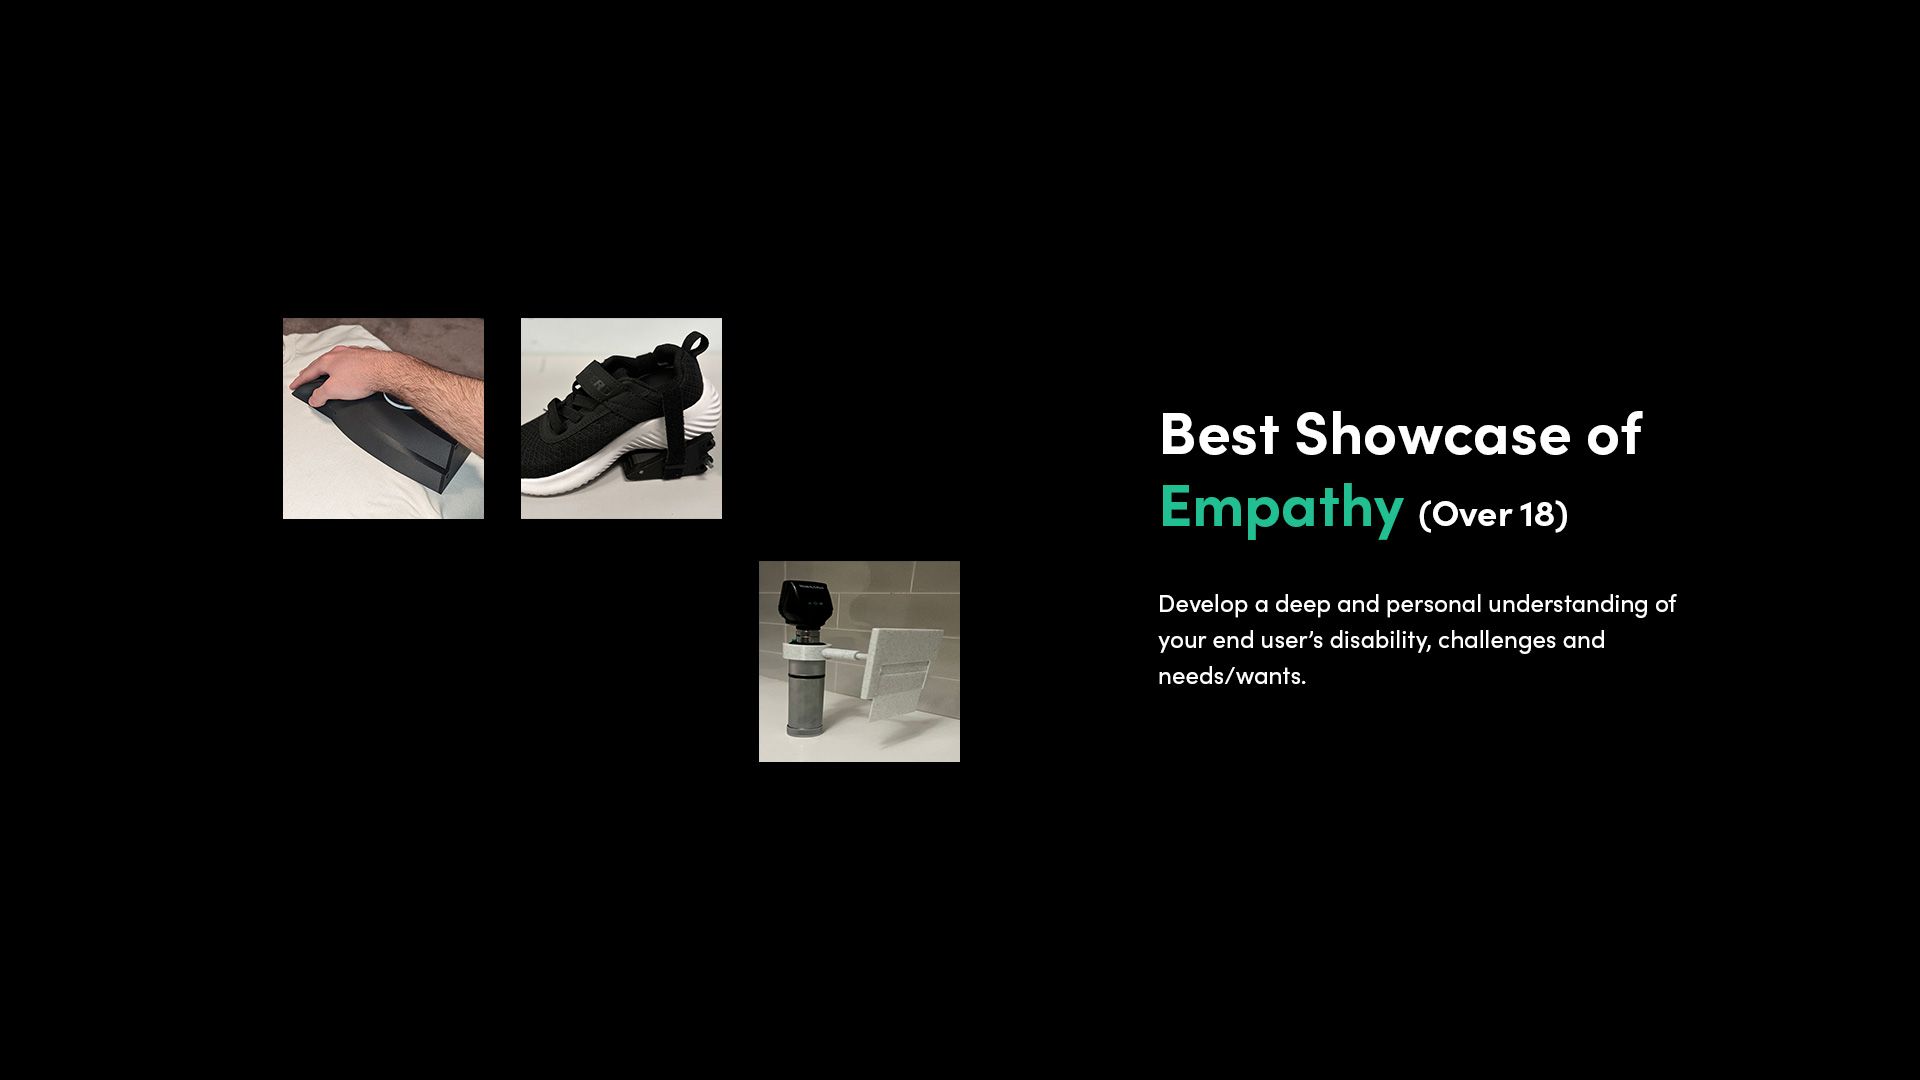 A selection of 3D printed assistive devices that made the finalist shortlist for the Make:able Challenge, in the category 'Best Showcase of Empathy - Over 18'.